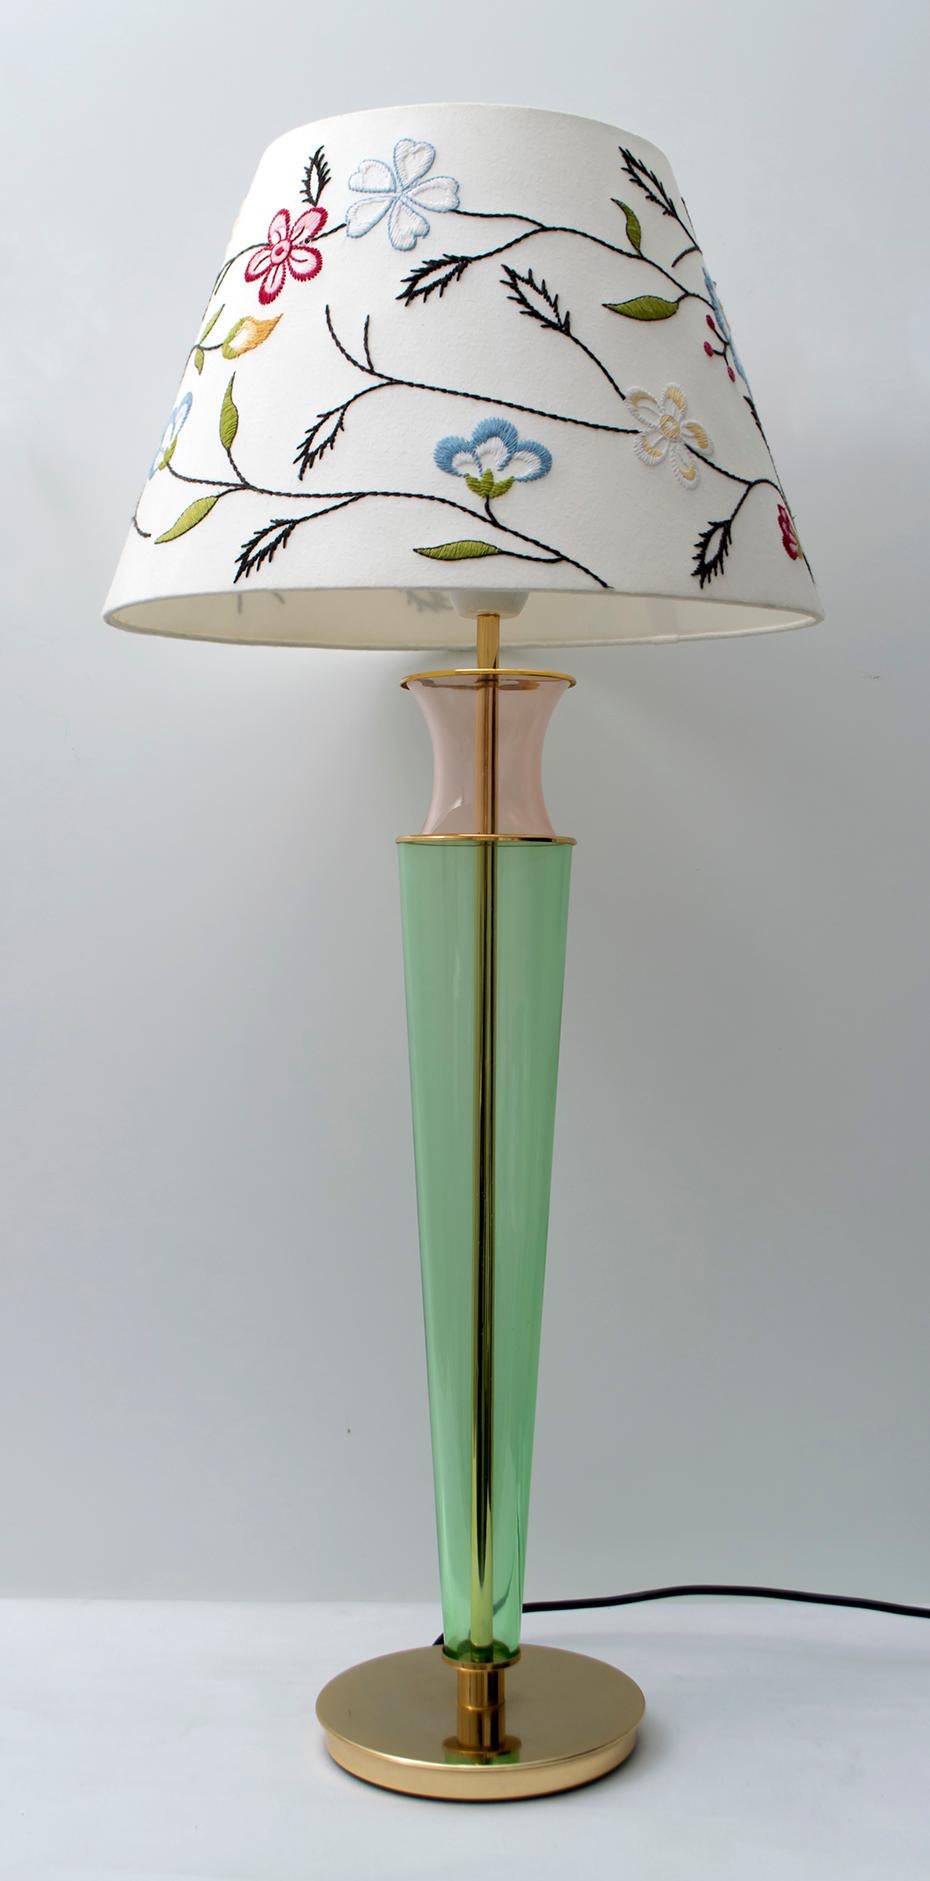 This lamp was created by Maestri Muranesi, with the blown glass technique, in green and pink colors, the supports are in brass, Italy, 1980s.

Only the lamp measures 65 cm high and 18 cm in diameter.

